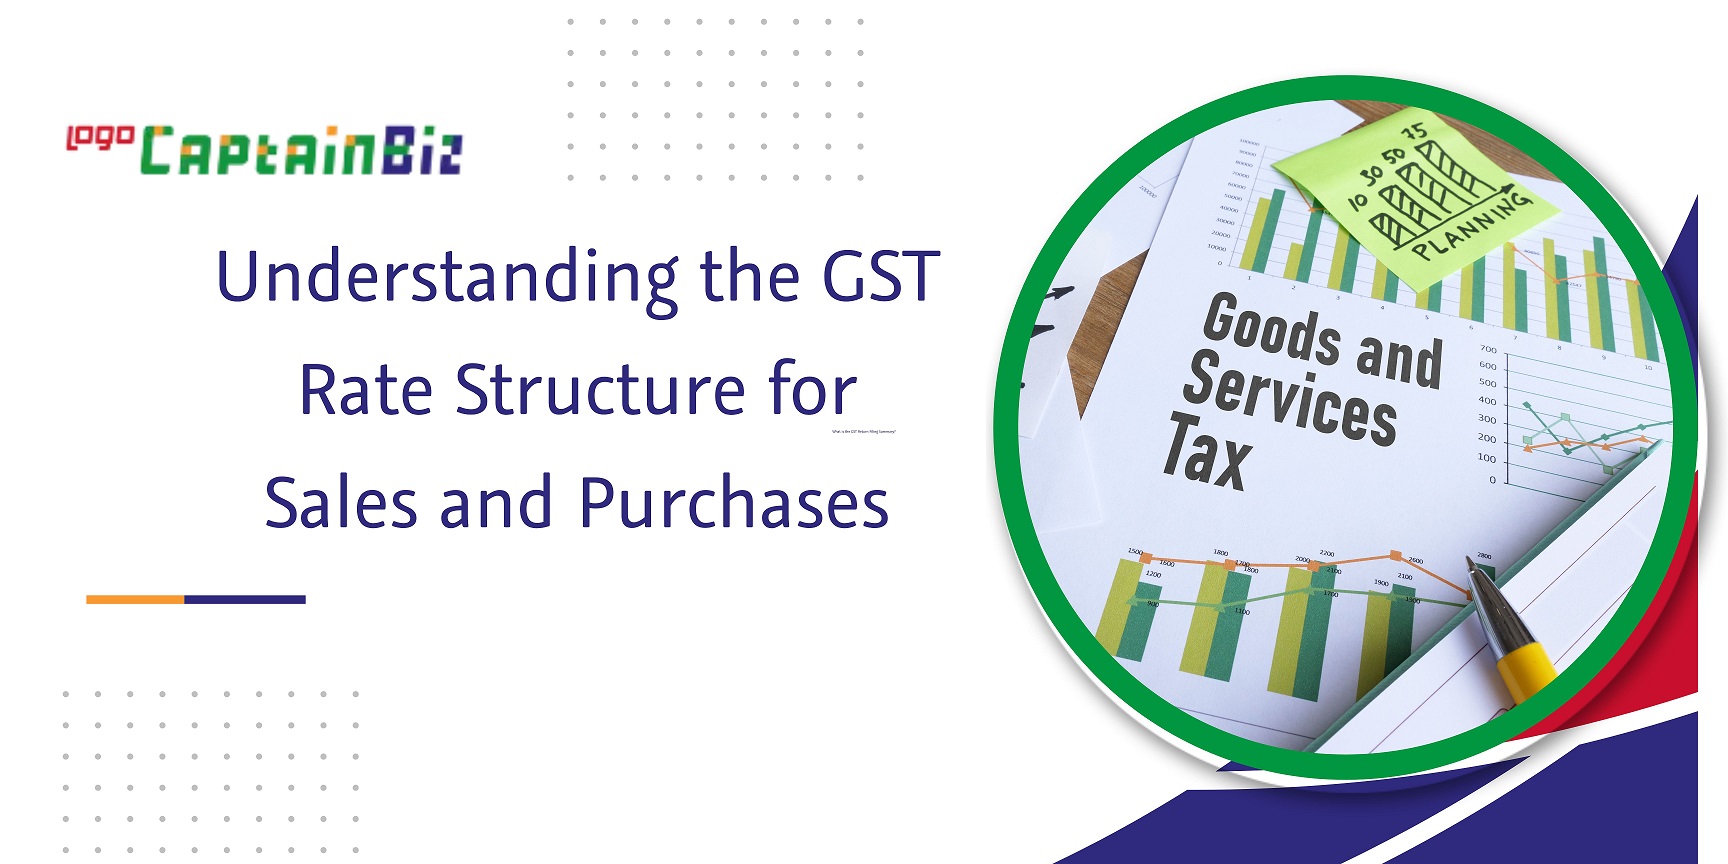 CaptainBiz: understanding the gst rate structure for sales and purchases